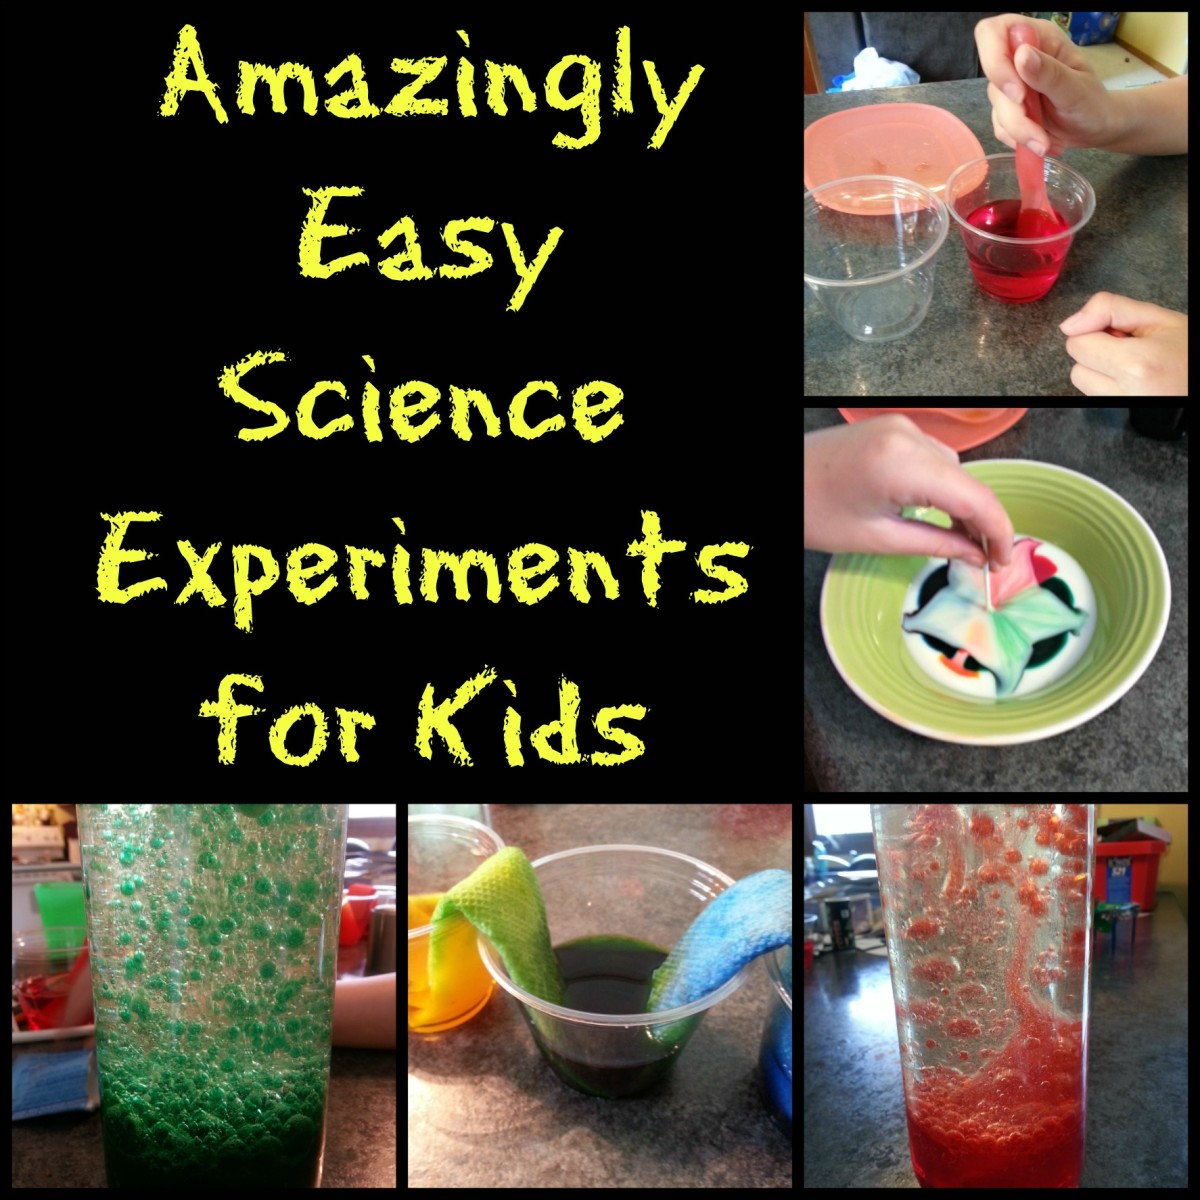 Amazingly Easy Science Experiments for Kids | HubPages